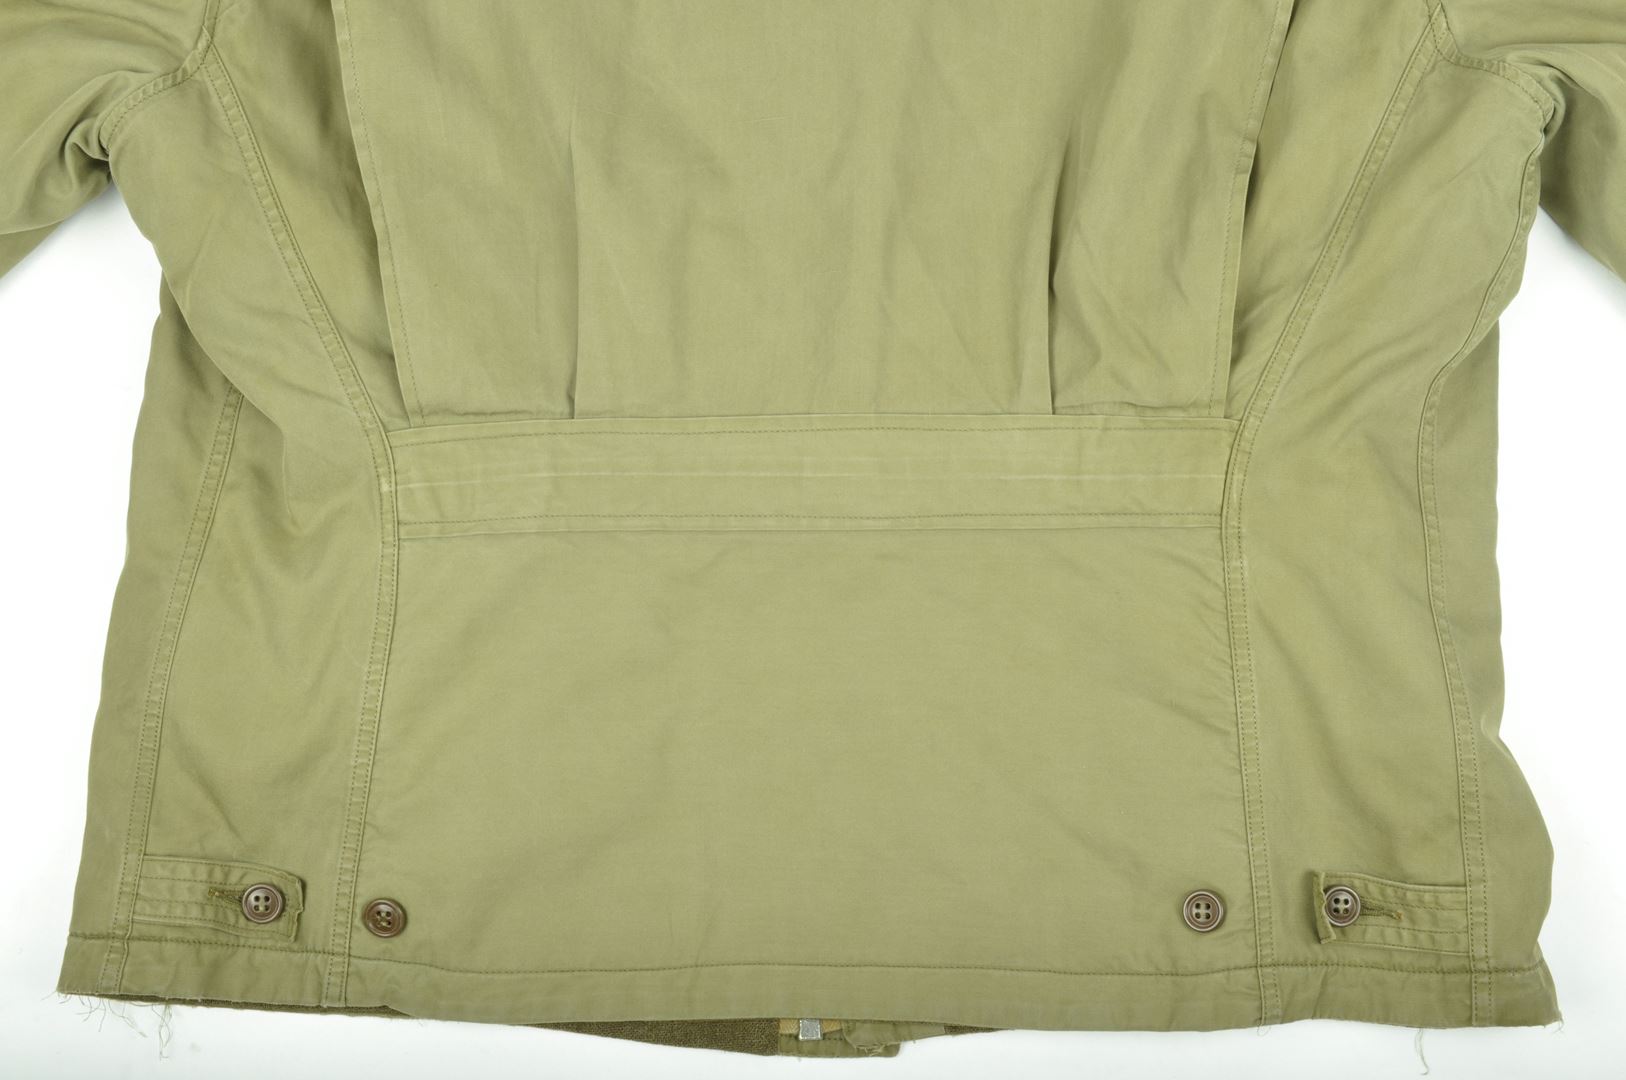 Blouson M-38 Parsons / 2nd Armored Division